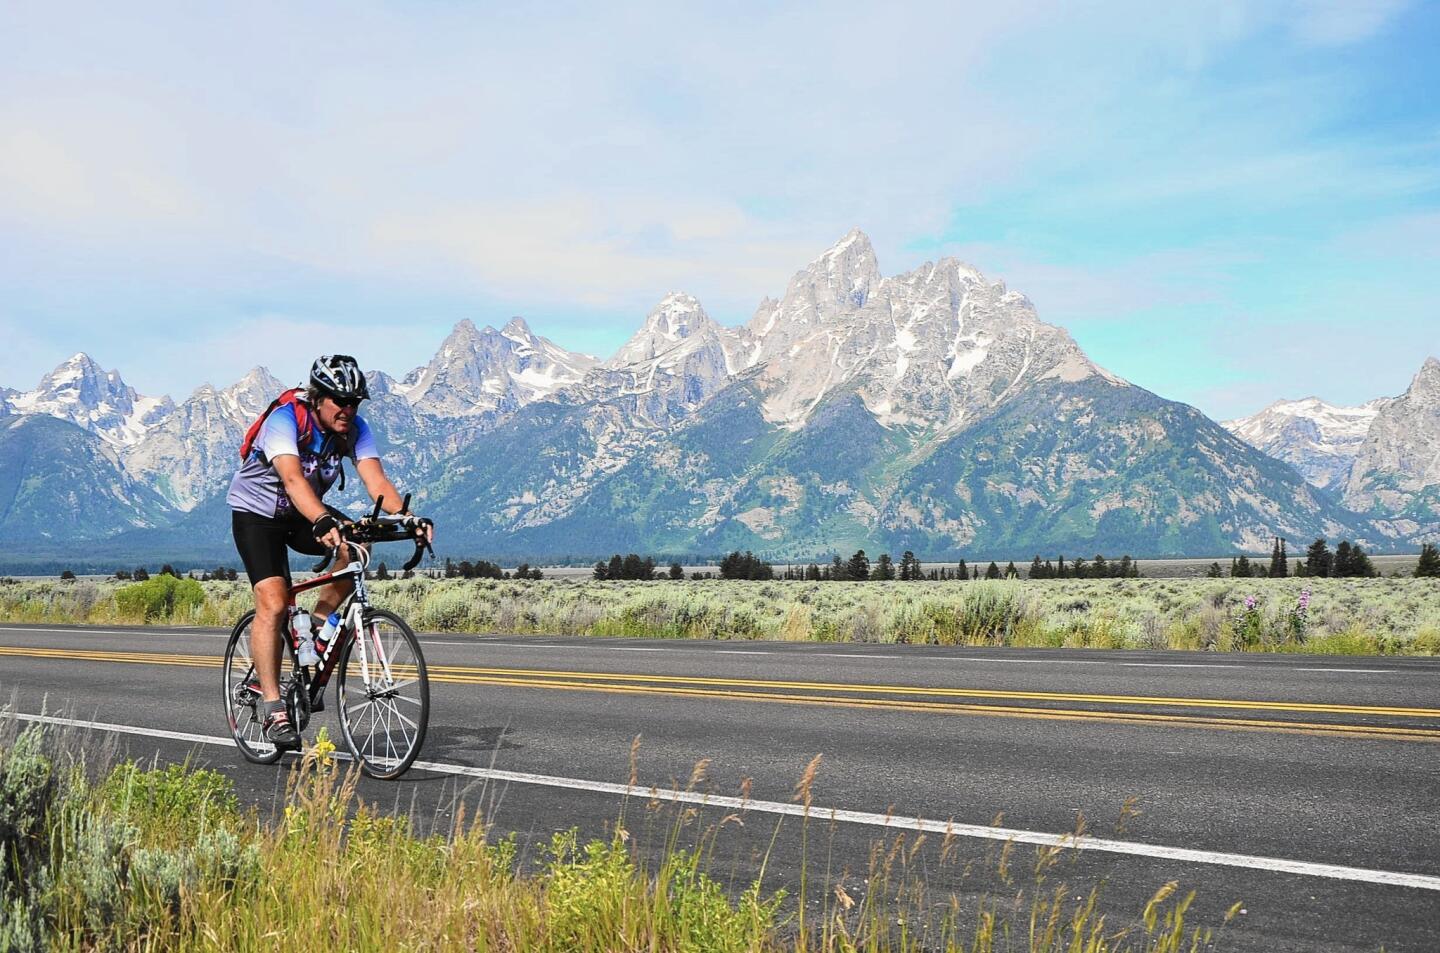 Paul Meincke rides past the beautiful Tetons on the way to the Continental Divide.